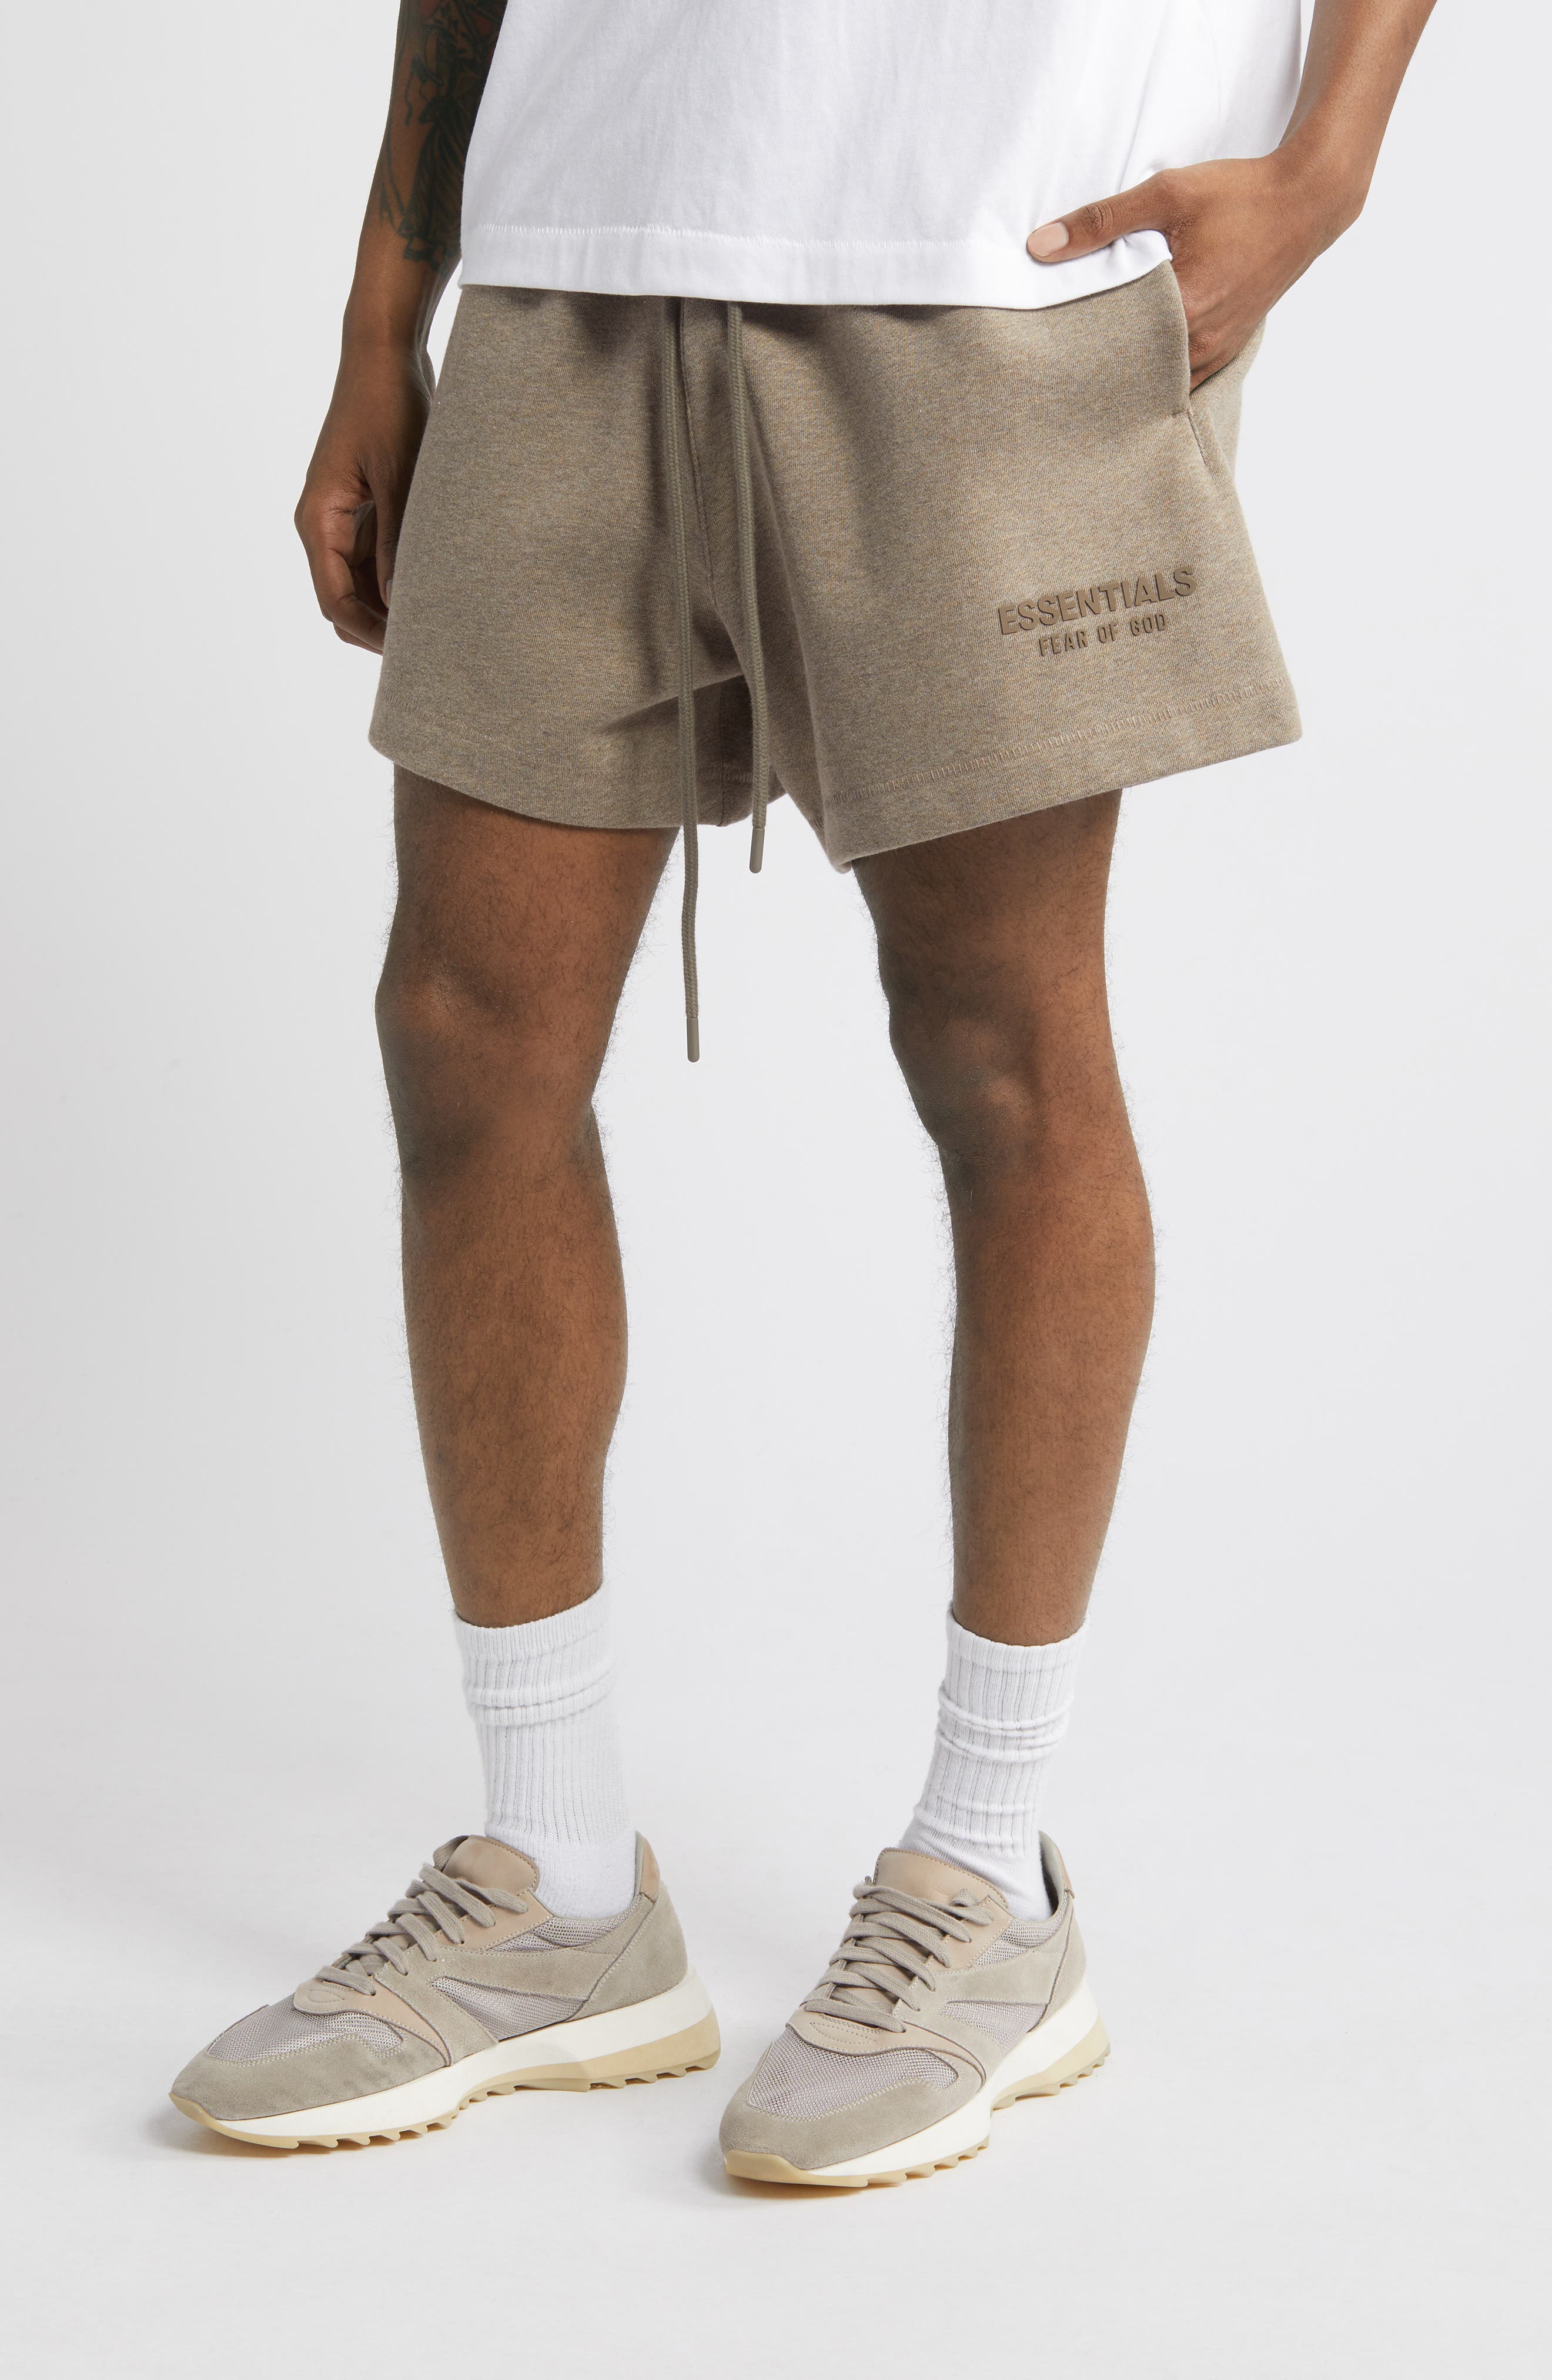 Fear of God Essentials Oversize Sweat Shorts | Nordstrom